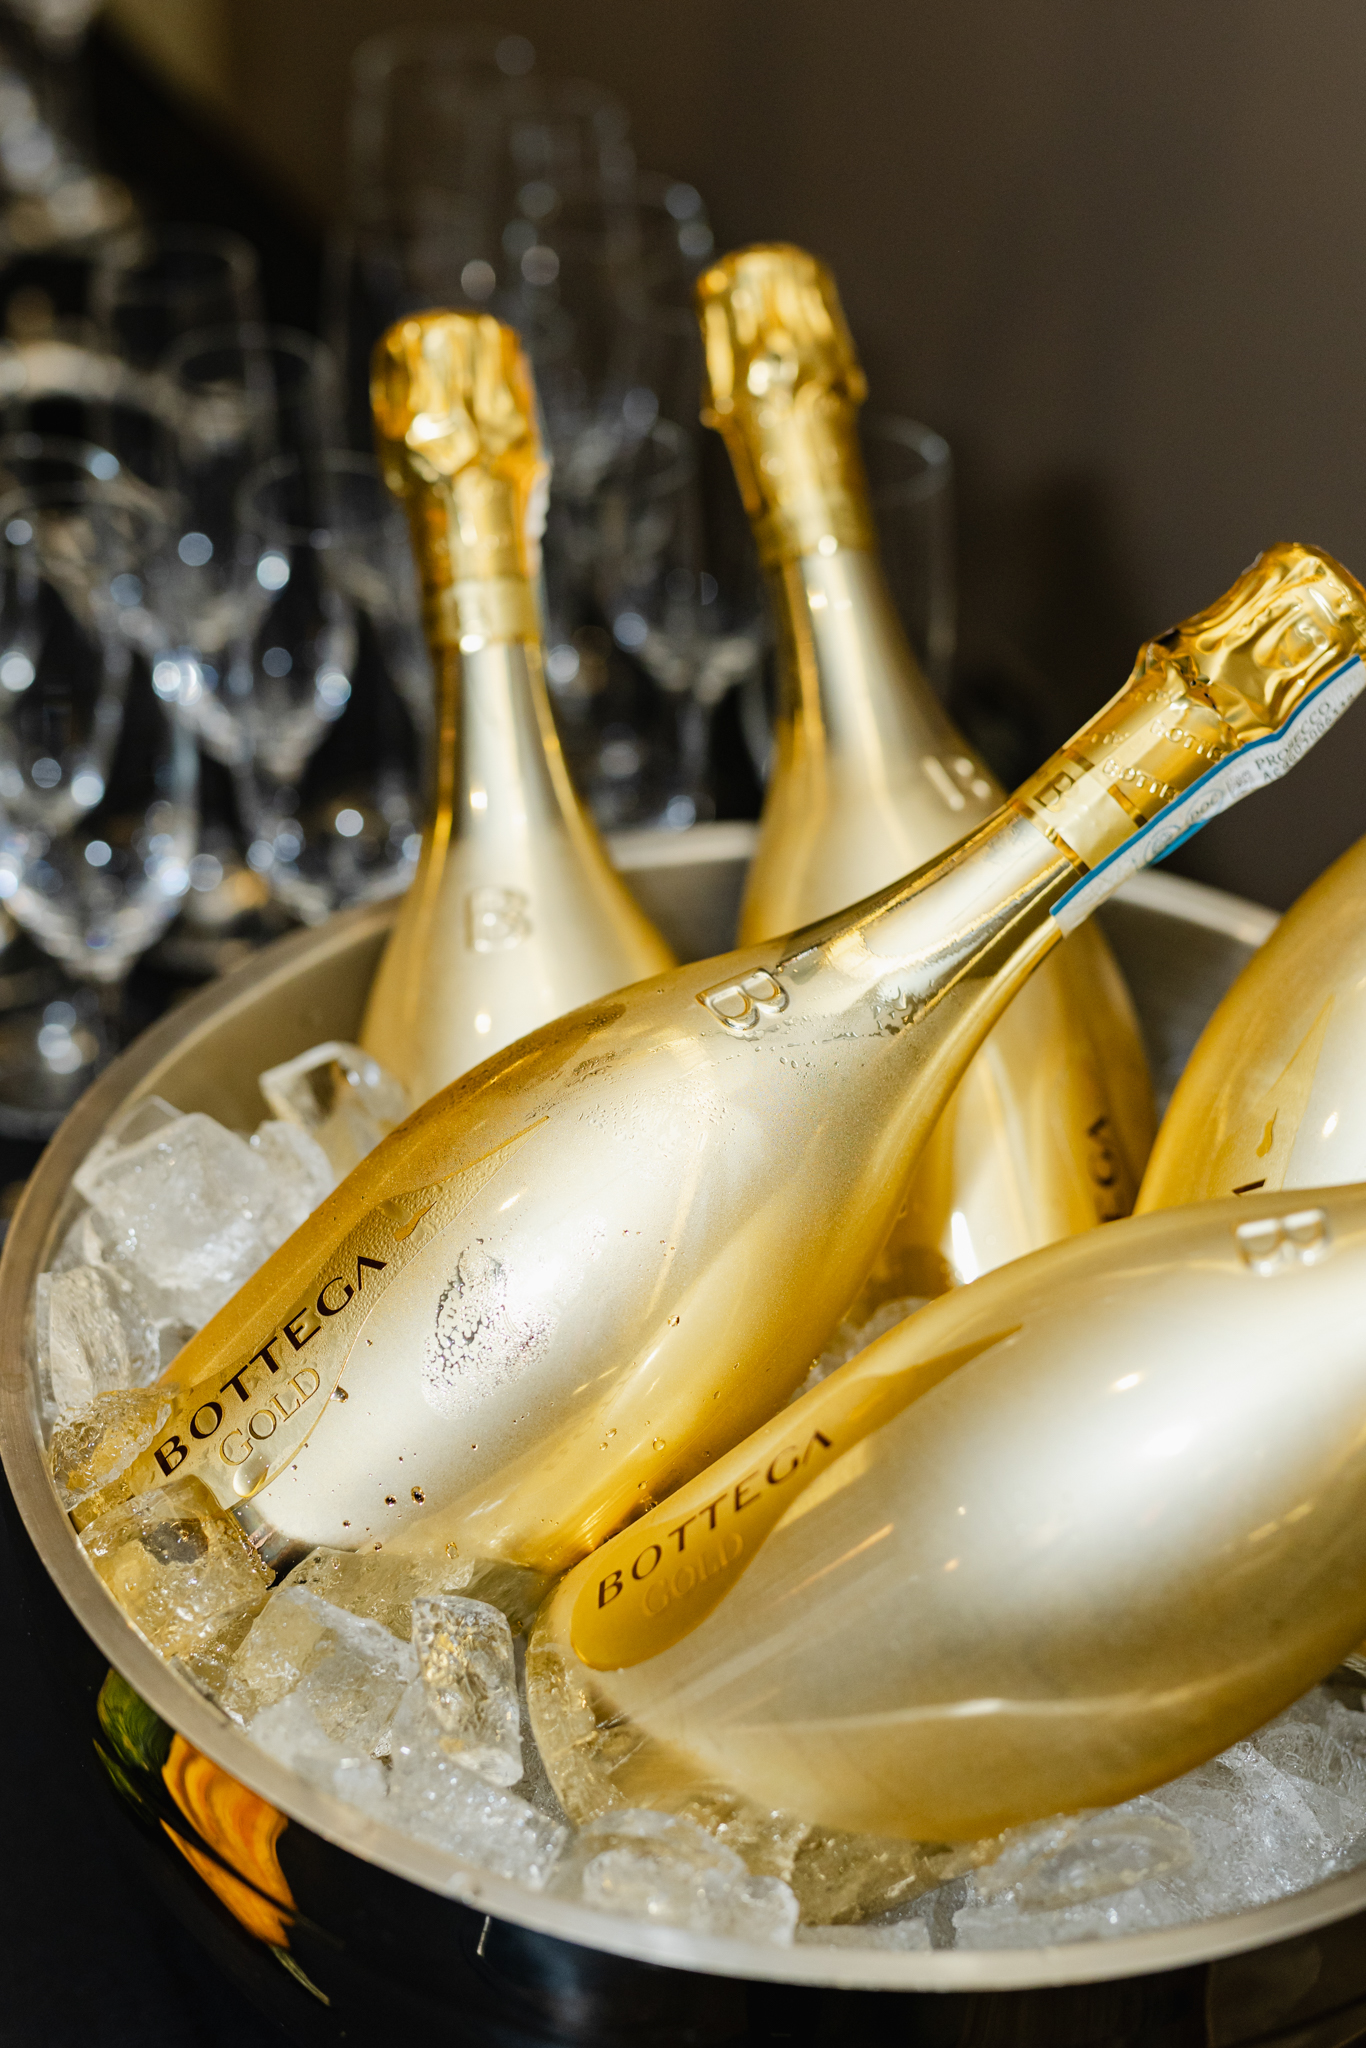 Conference Photography: Capturing the elegance of four gold bottles of champagne in a bowl of ice.